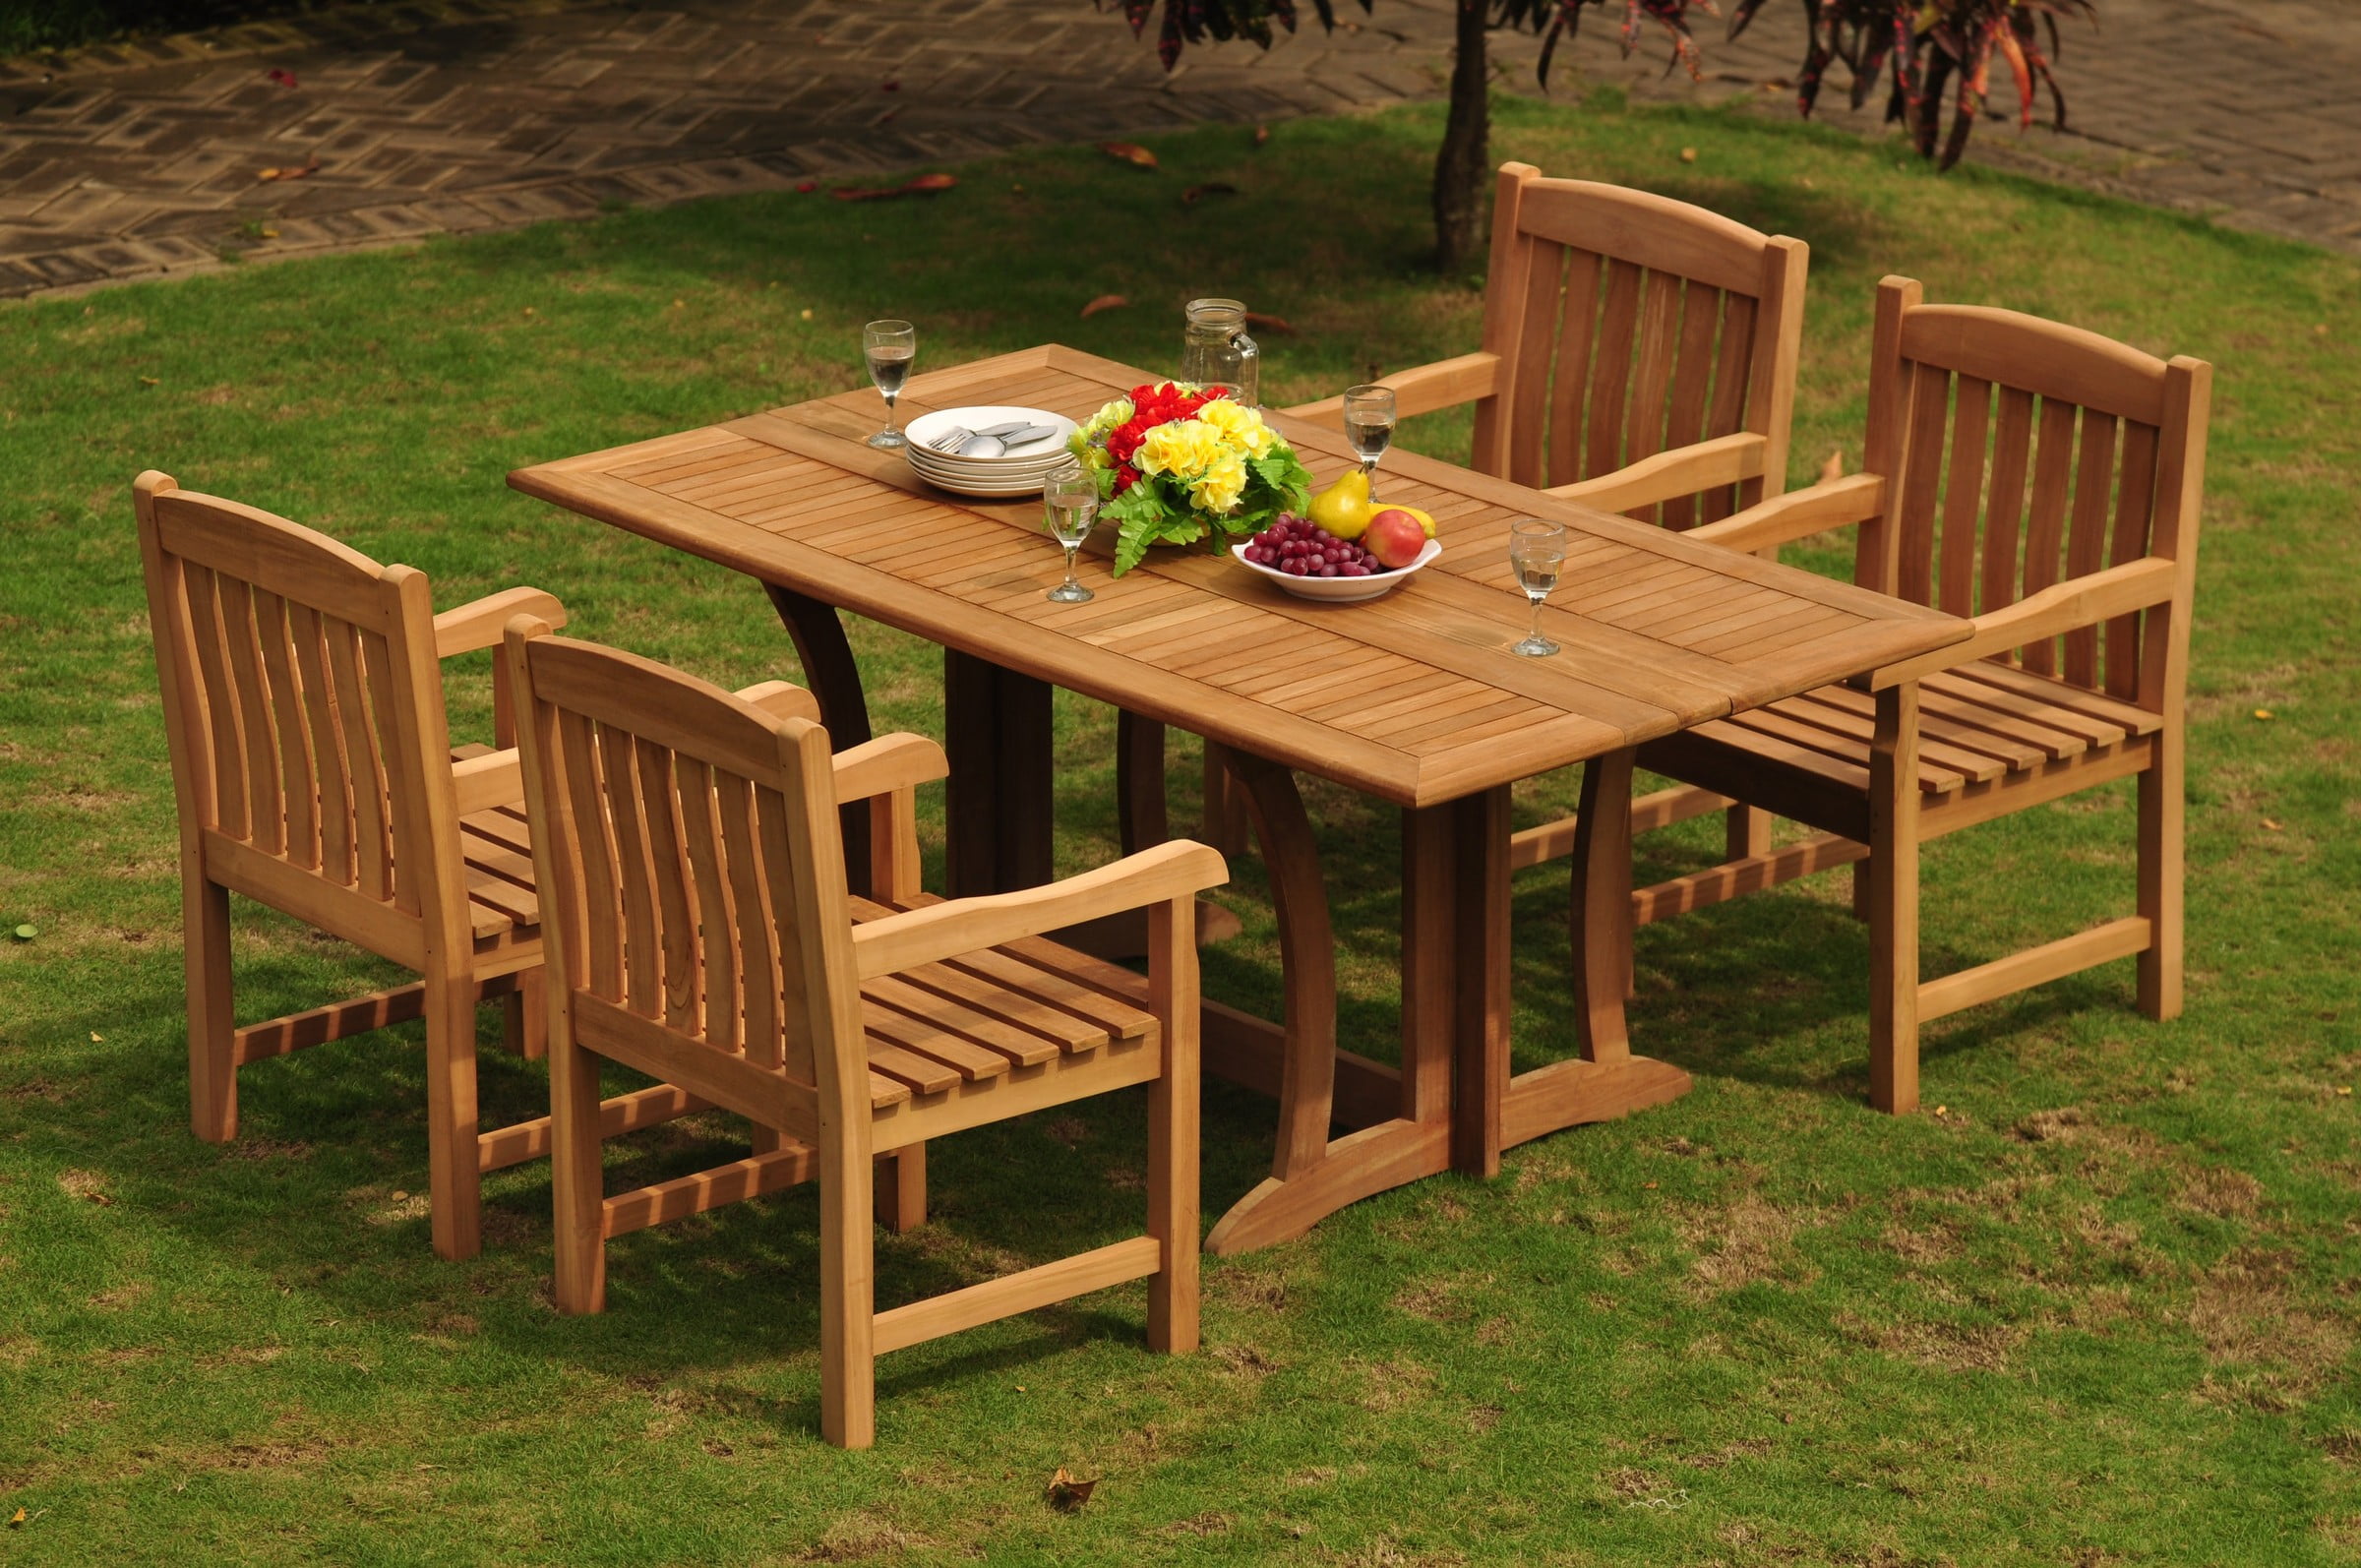 Why Teak Is The Gold Standard For Outdoor Furniture Sets